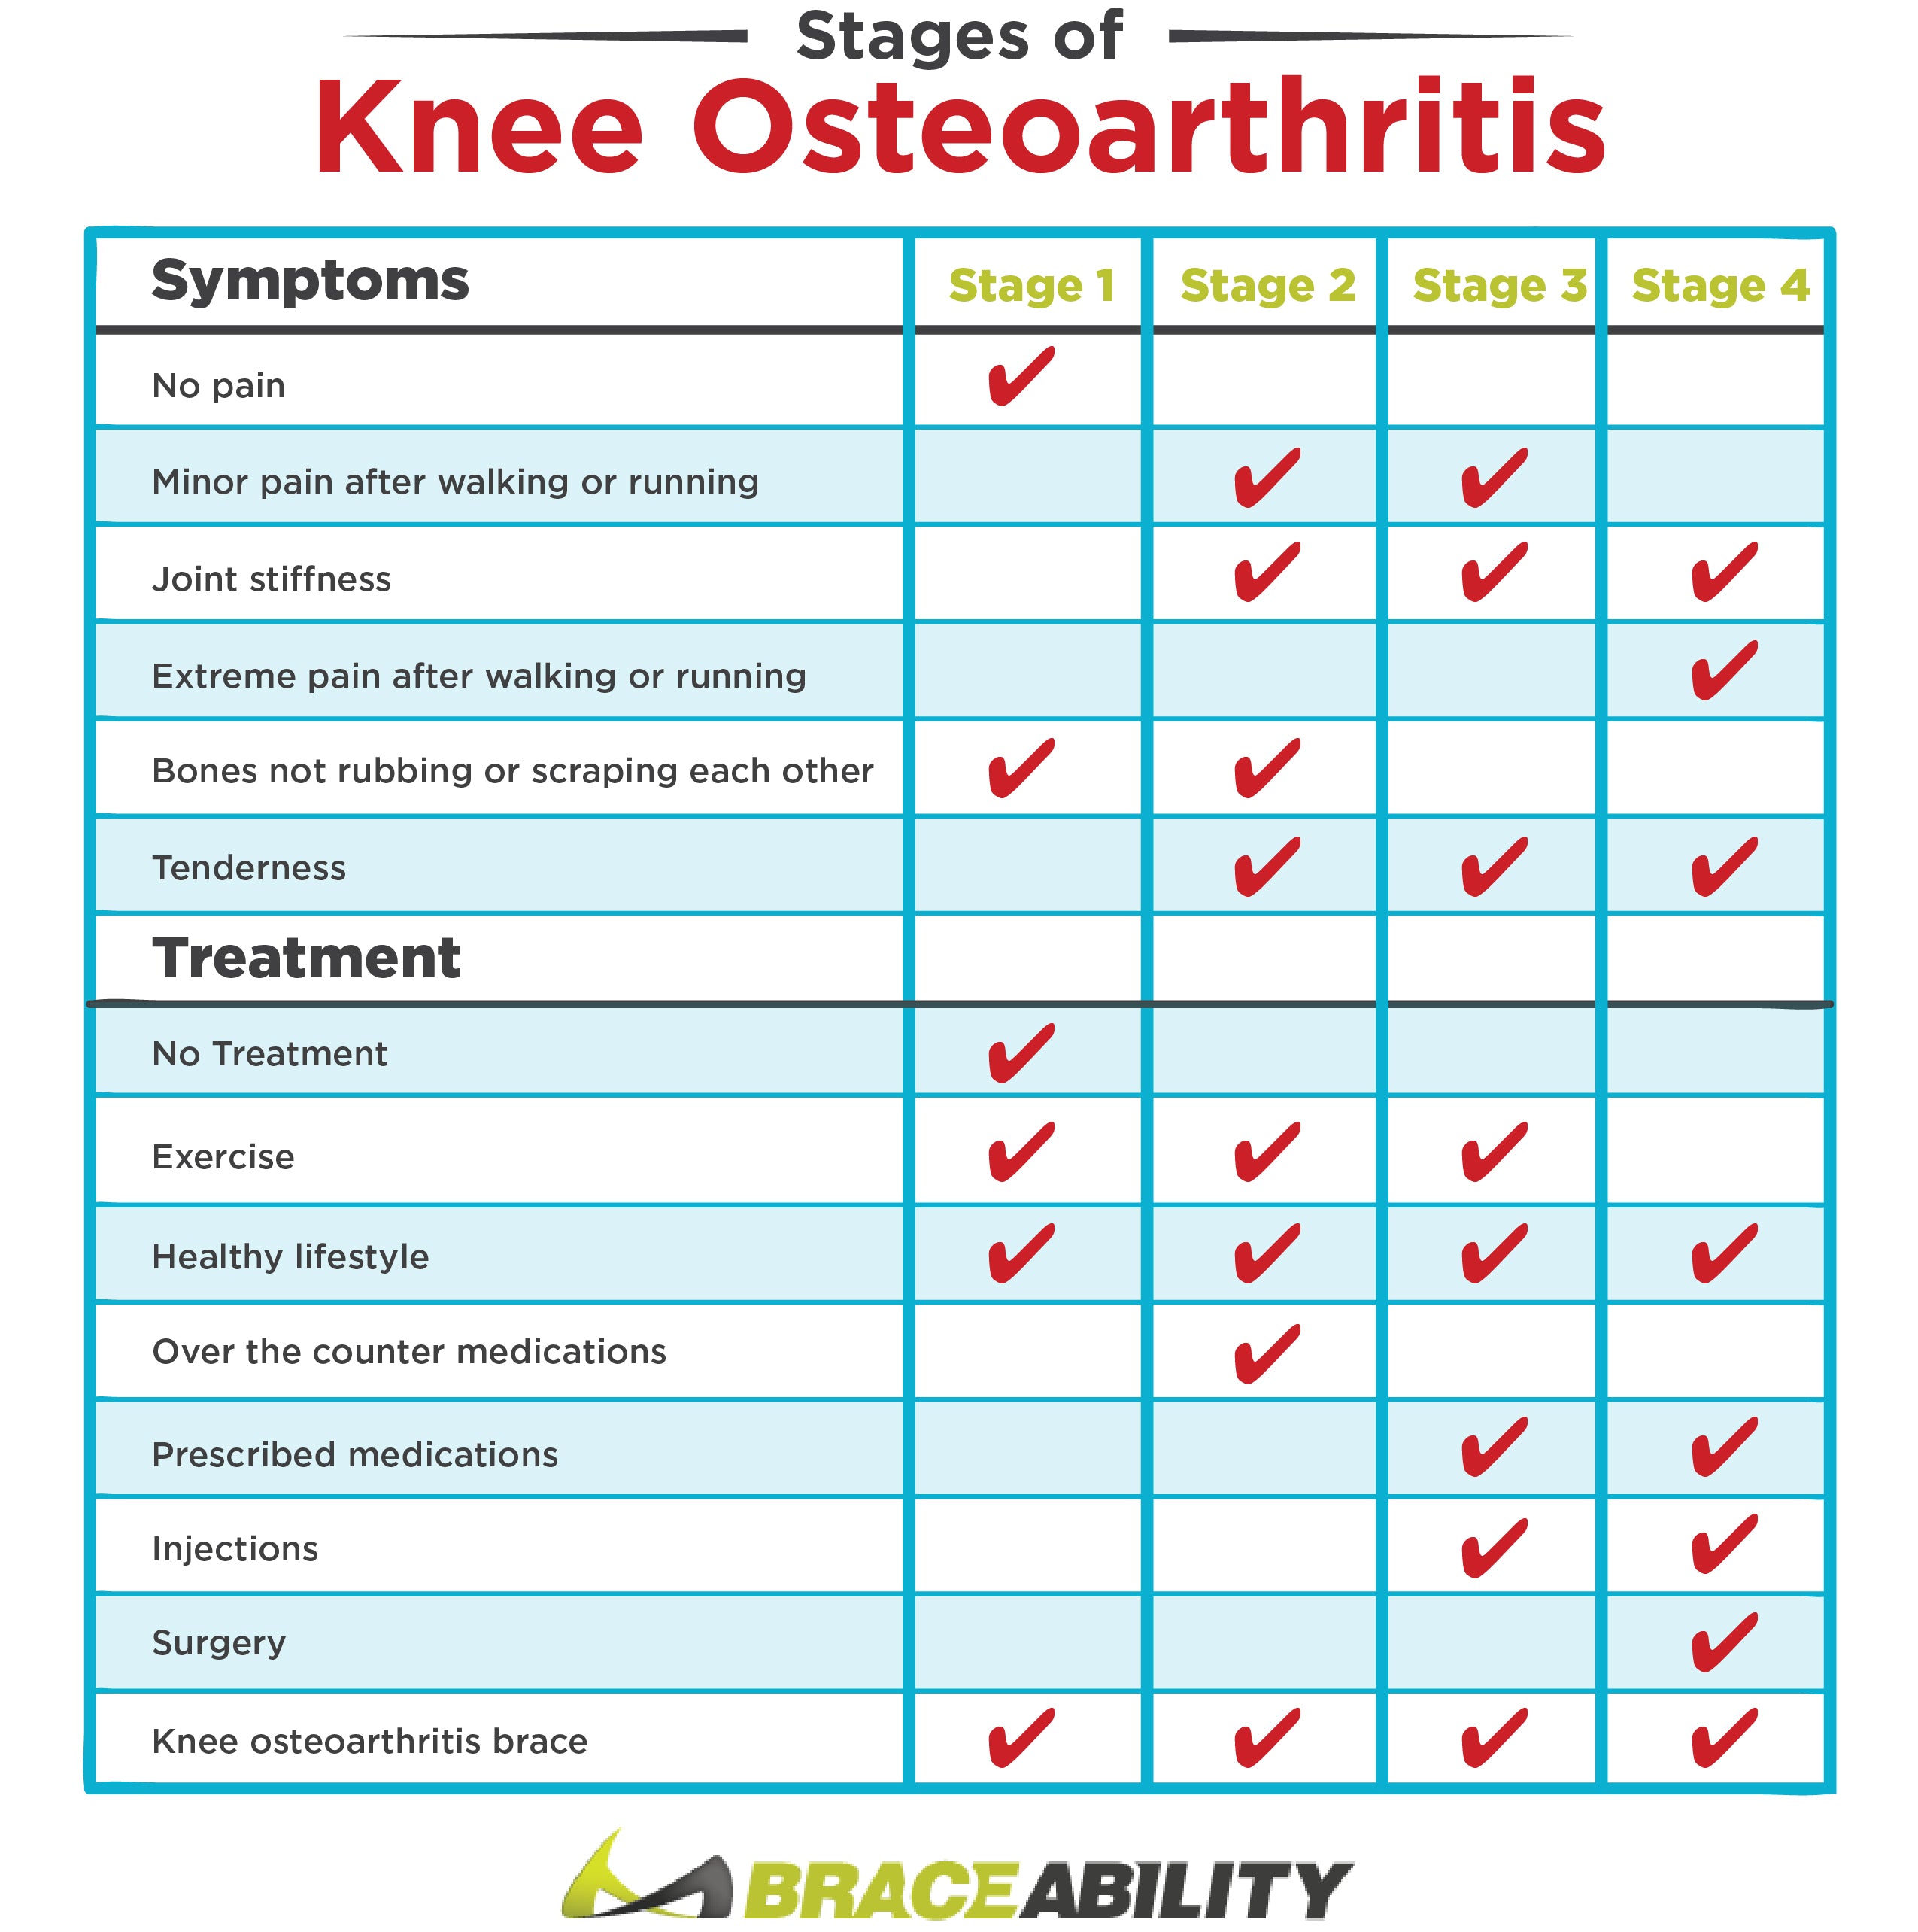 learn about the symptoms of knee osteoarthritis during each stage